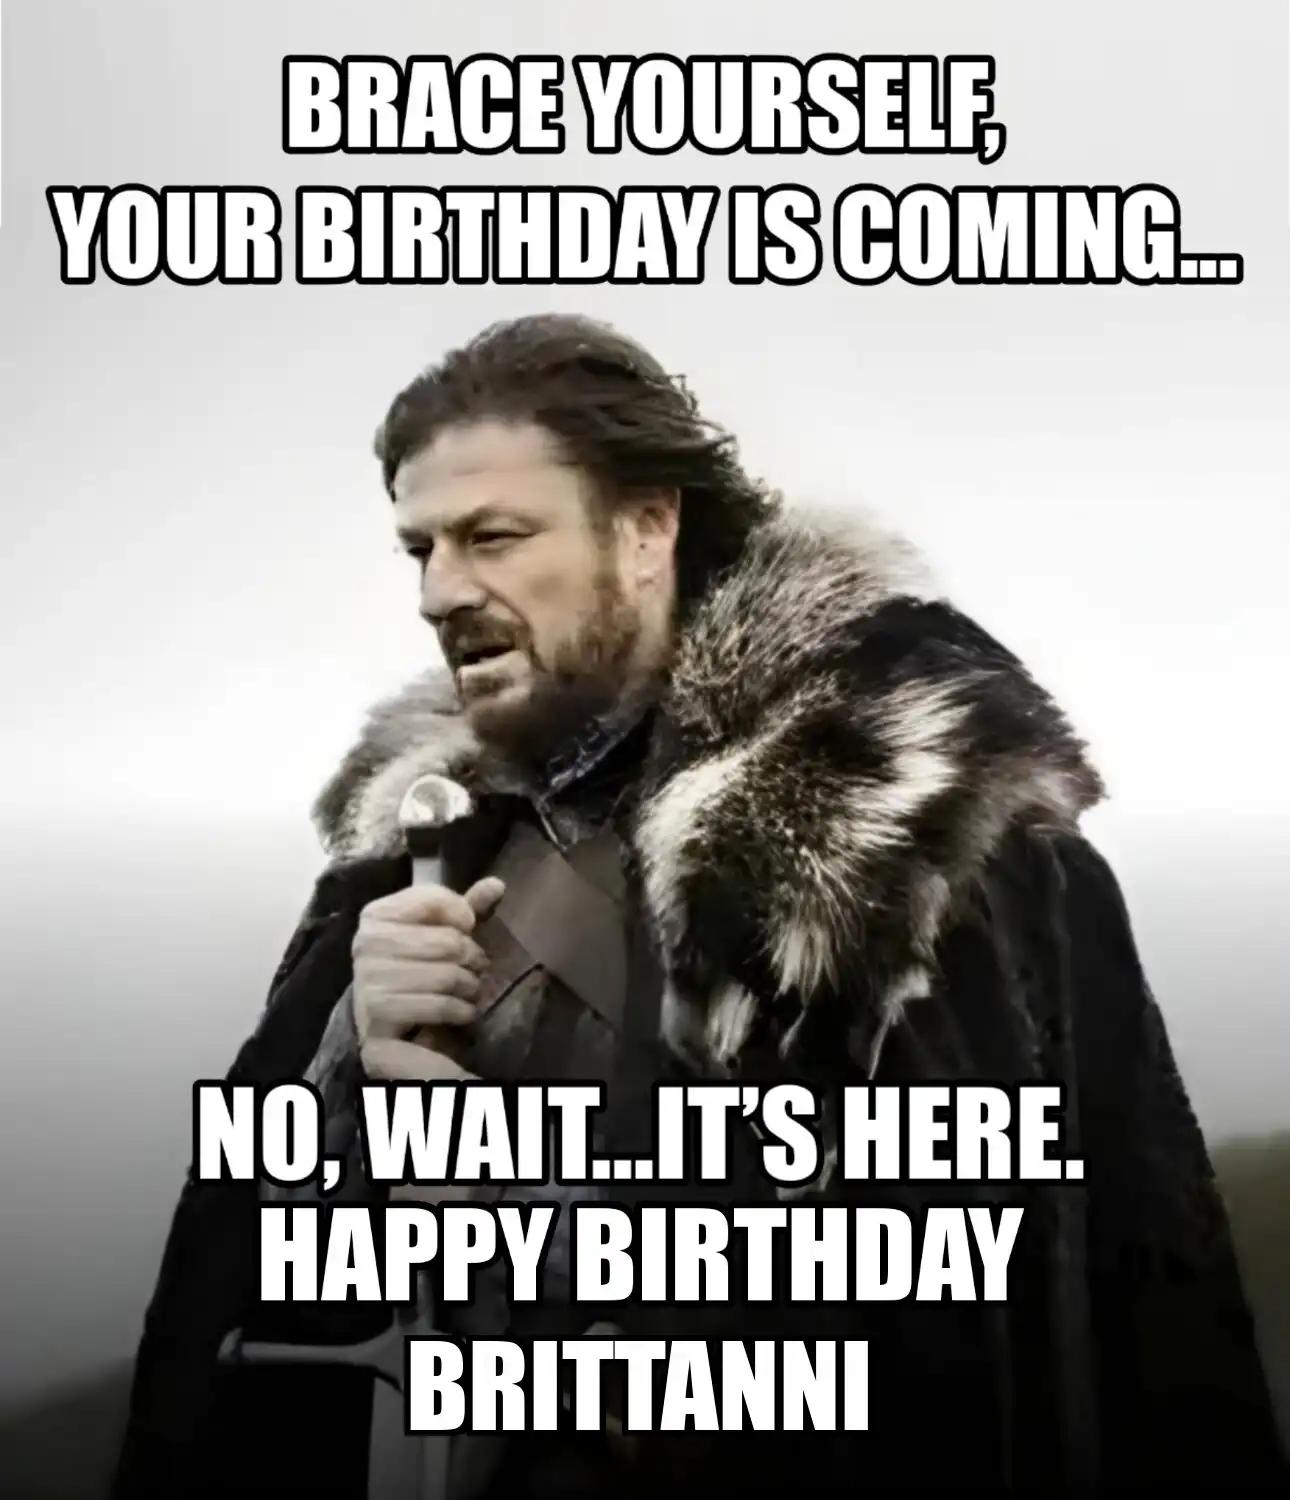 Happy Birthday Brittanni Brace Yourself Your Birthday Is Coming Meme